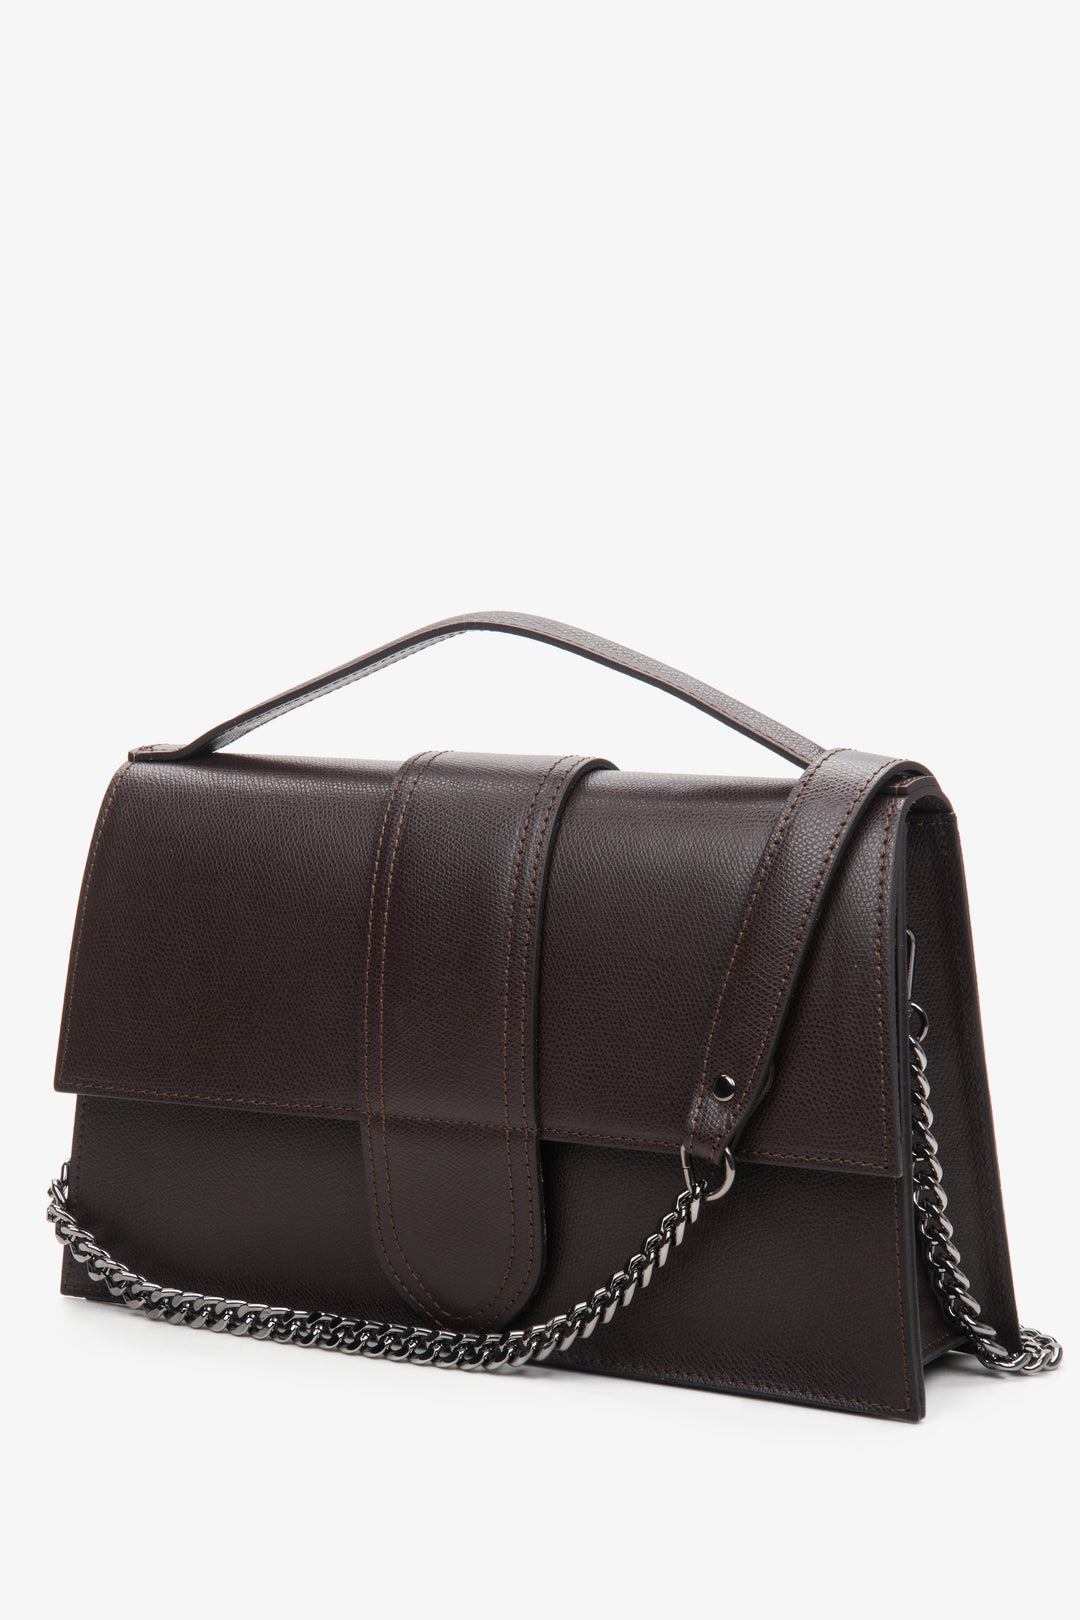 Women's small dark brown leather handbag by Estro - close-up on the front of the model.